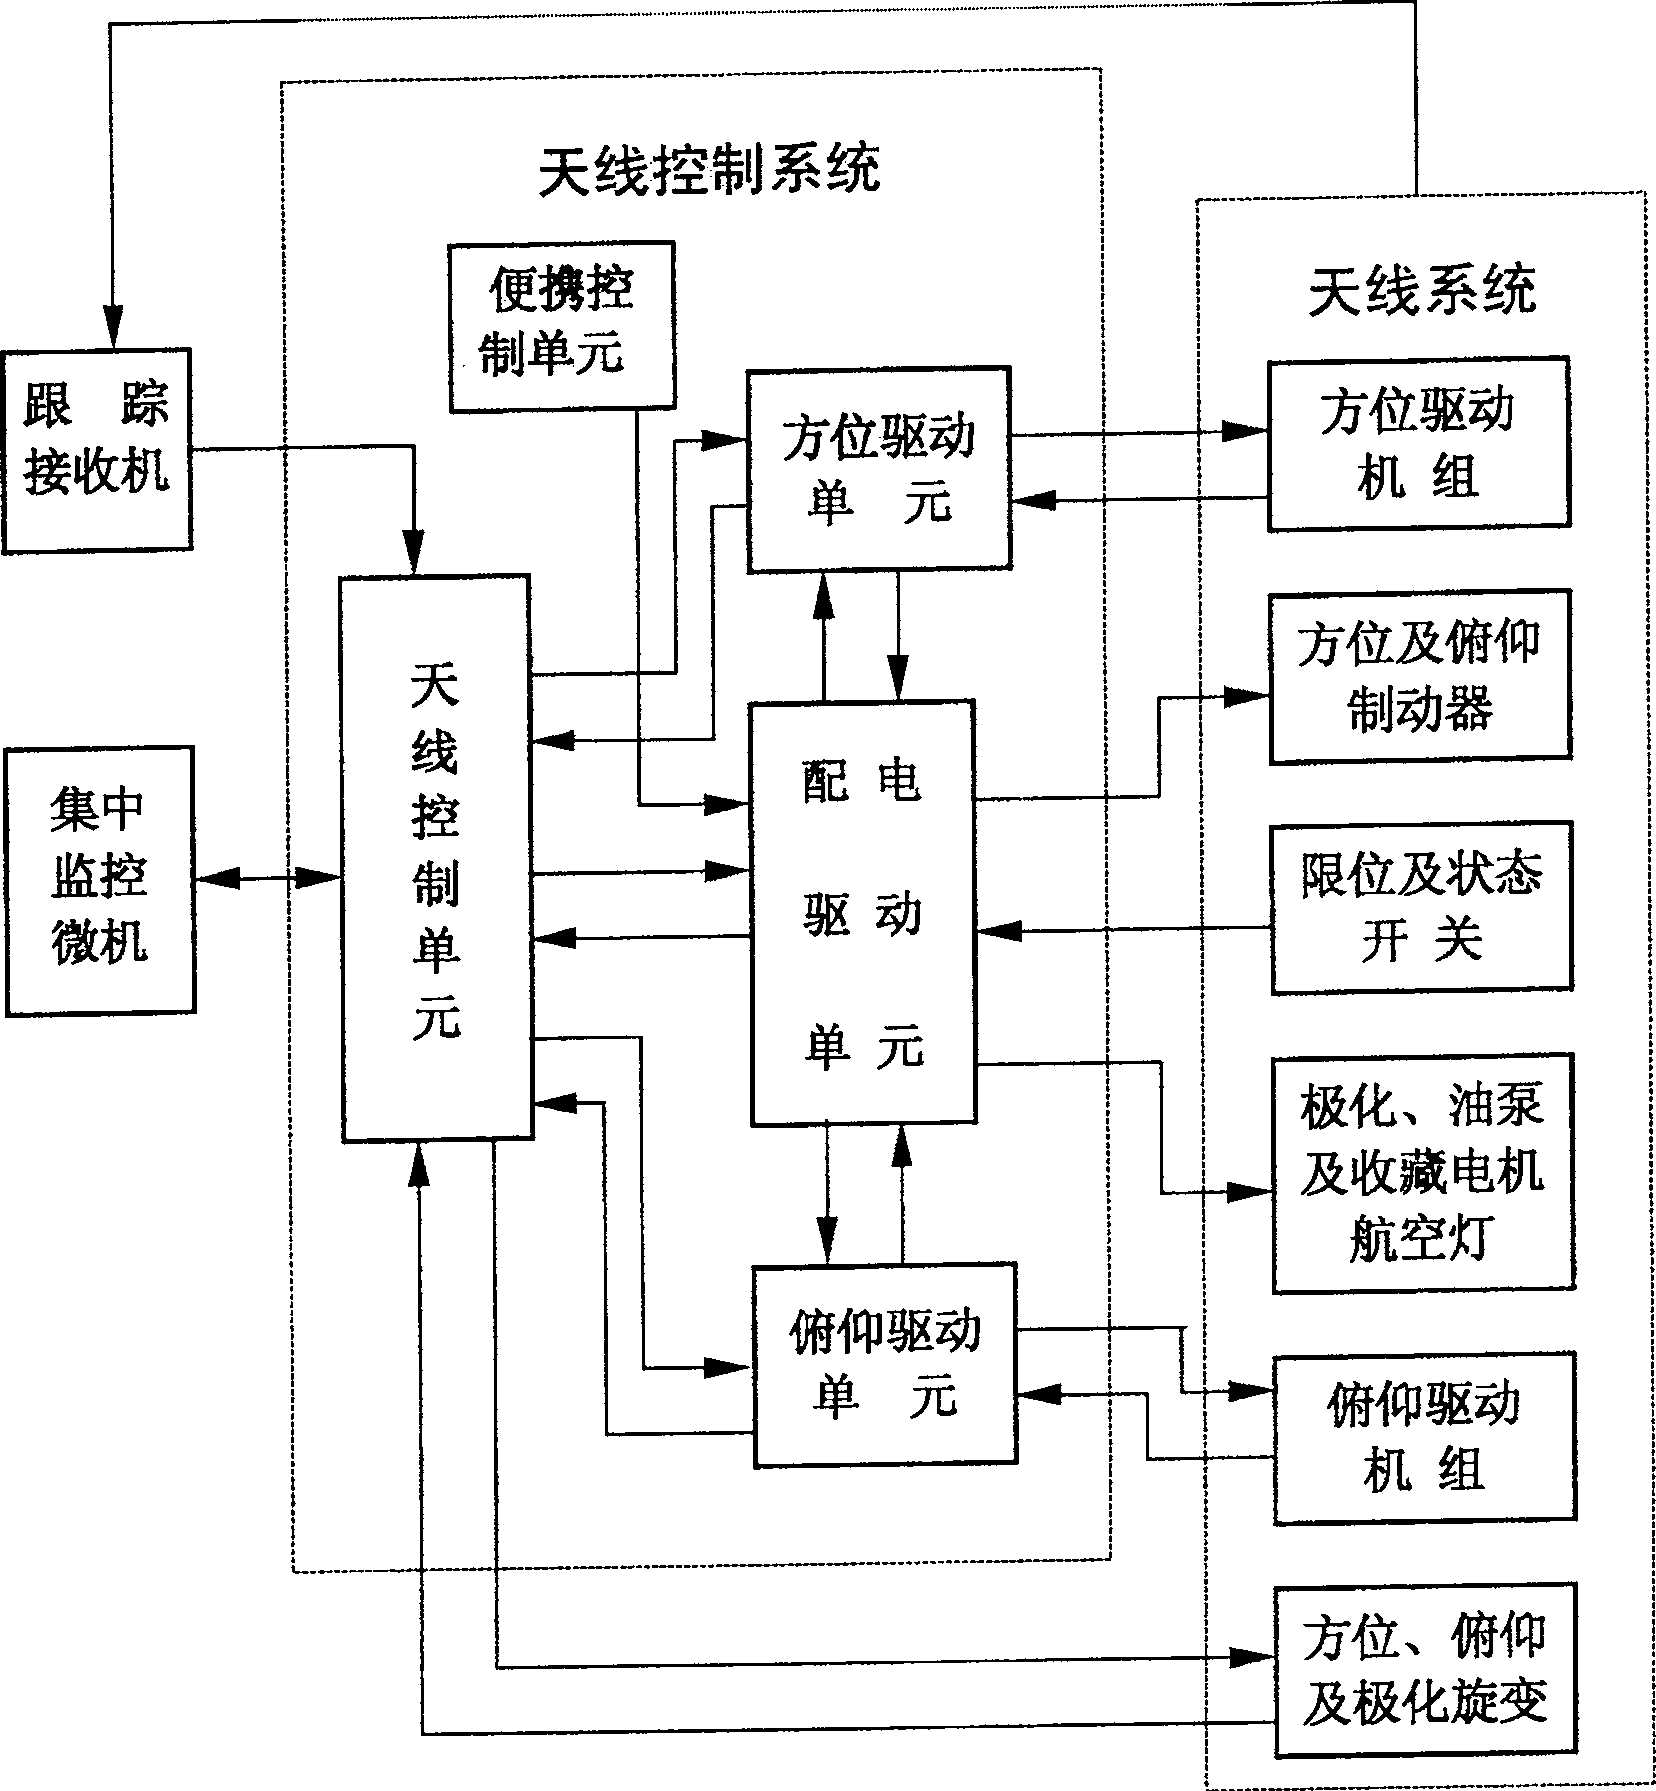 Method and device for layered priority control of high and low space remote sensing positioning servo of satellite communication